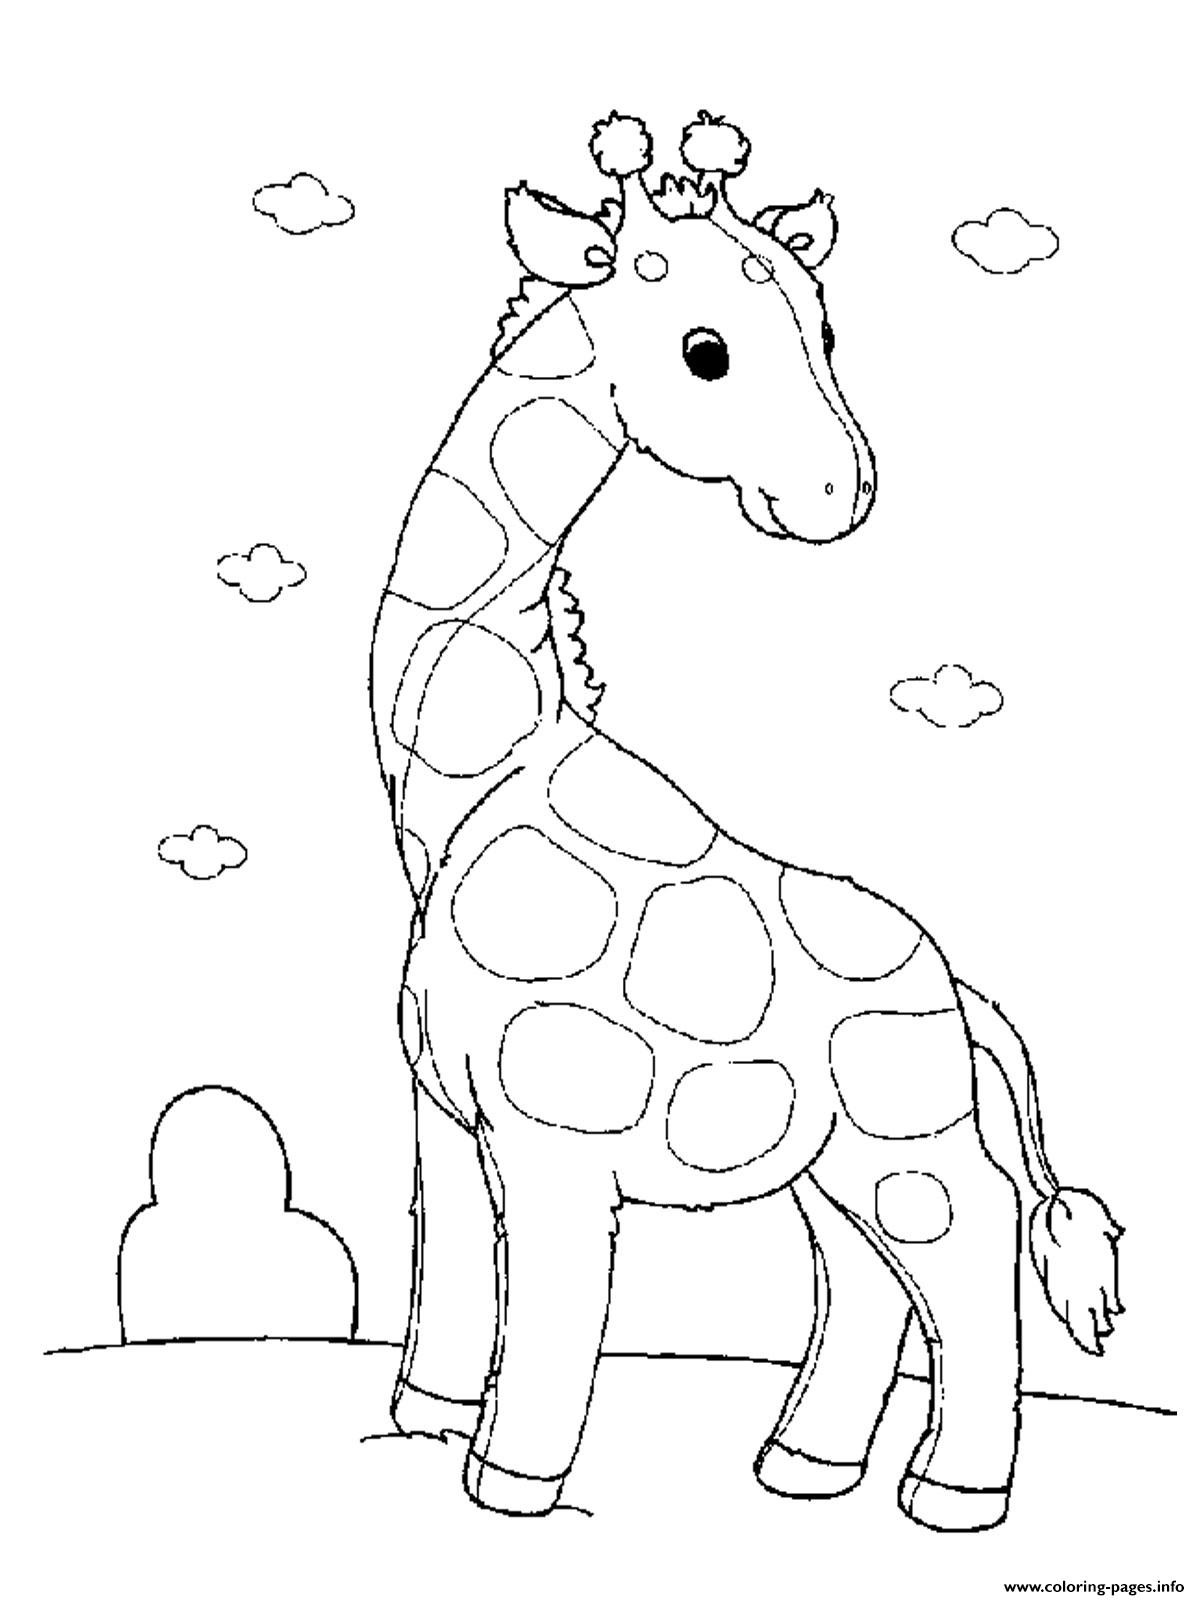 Coloring Pages For Girls Animals
 Baby Giraffe S For Girls Animals Printable13b0 Coloring